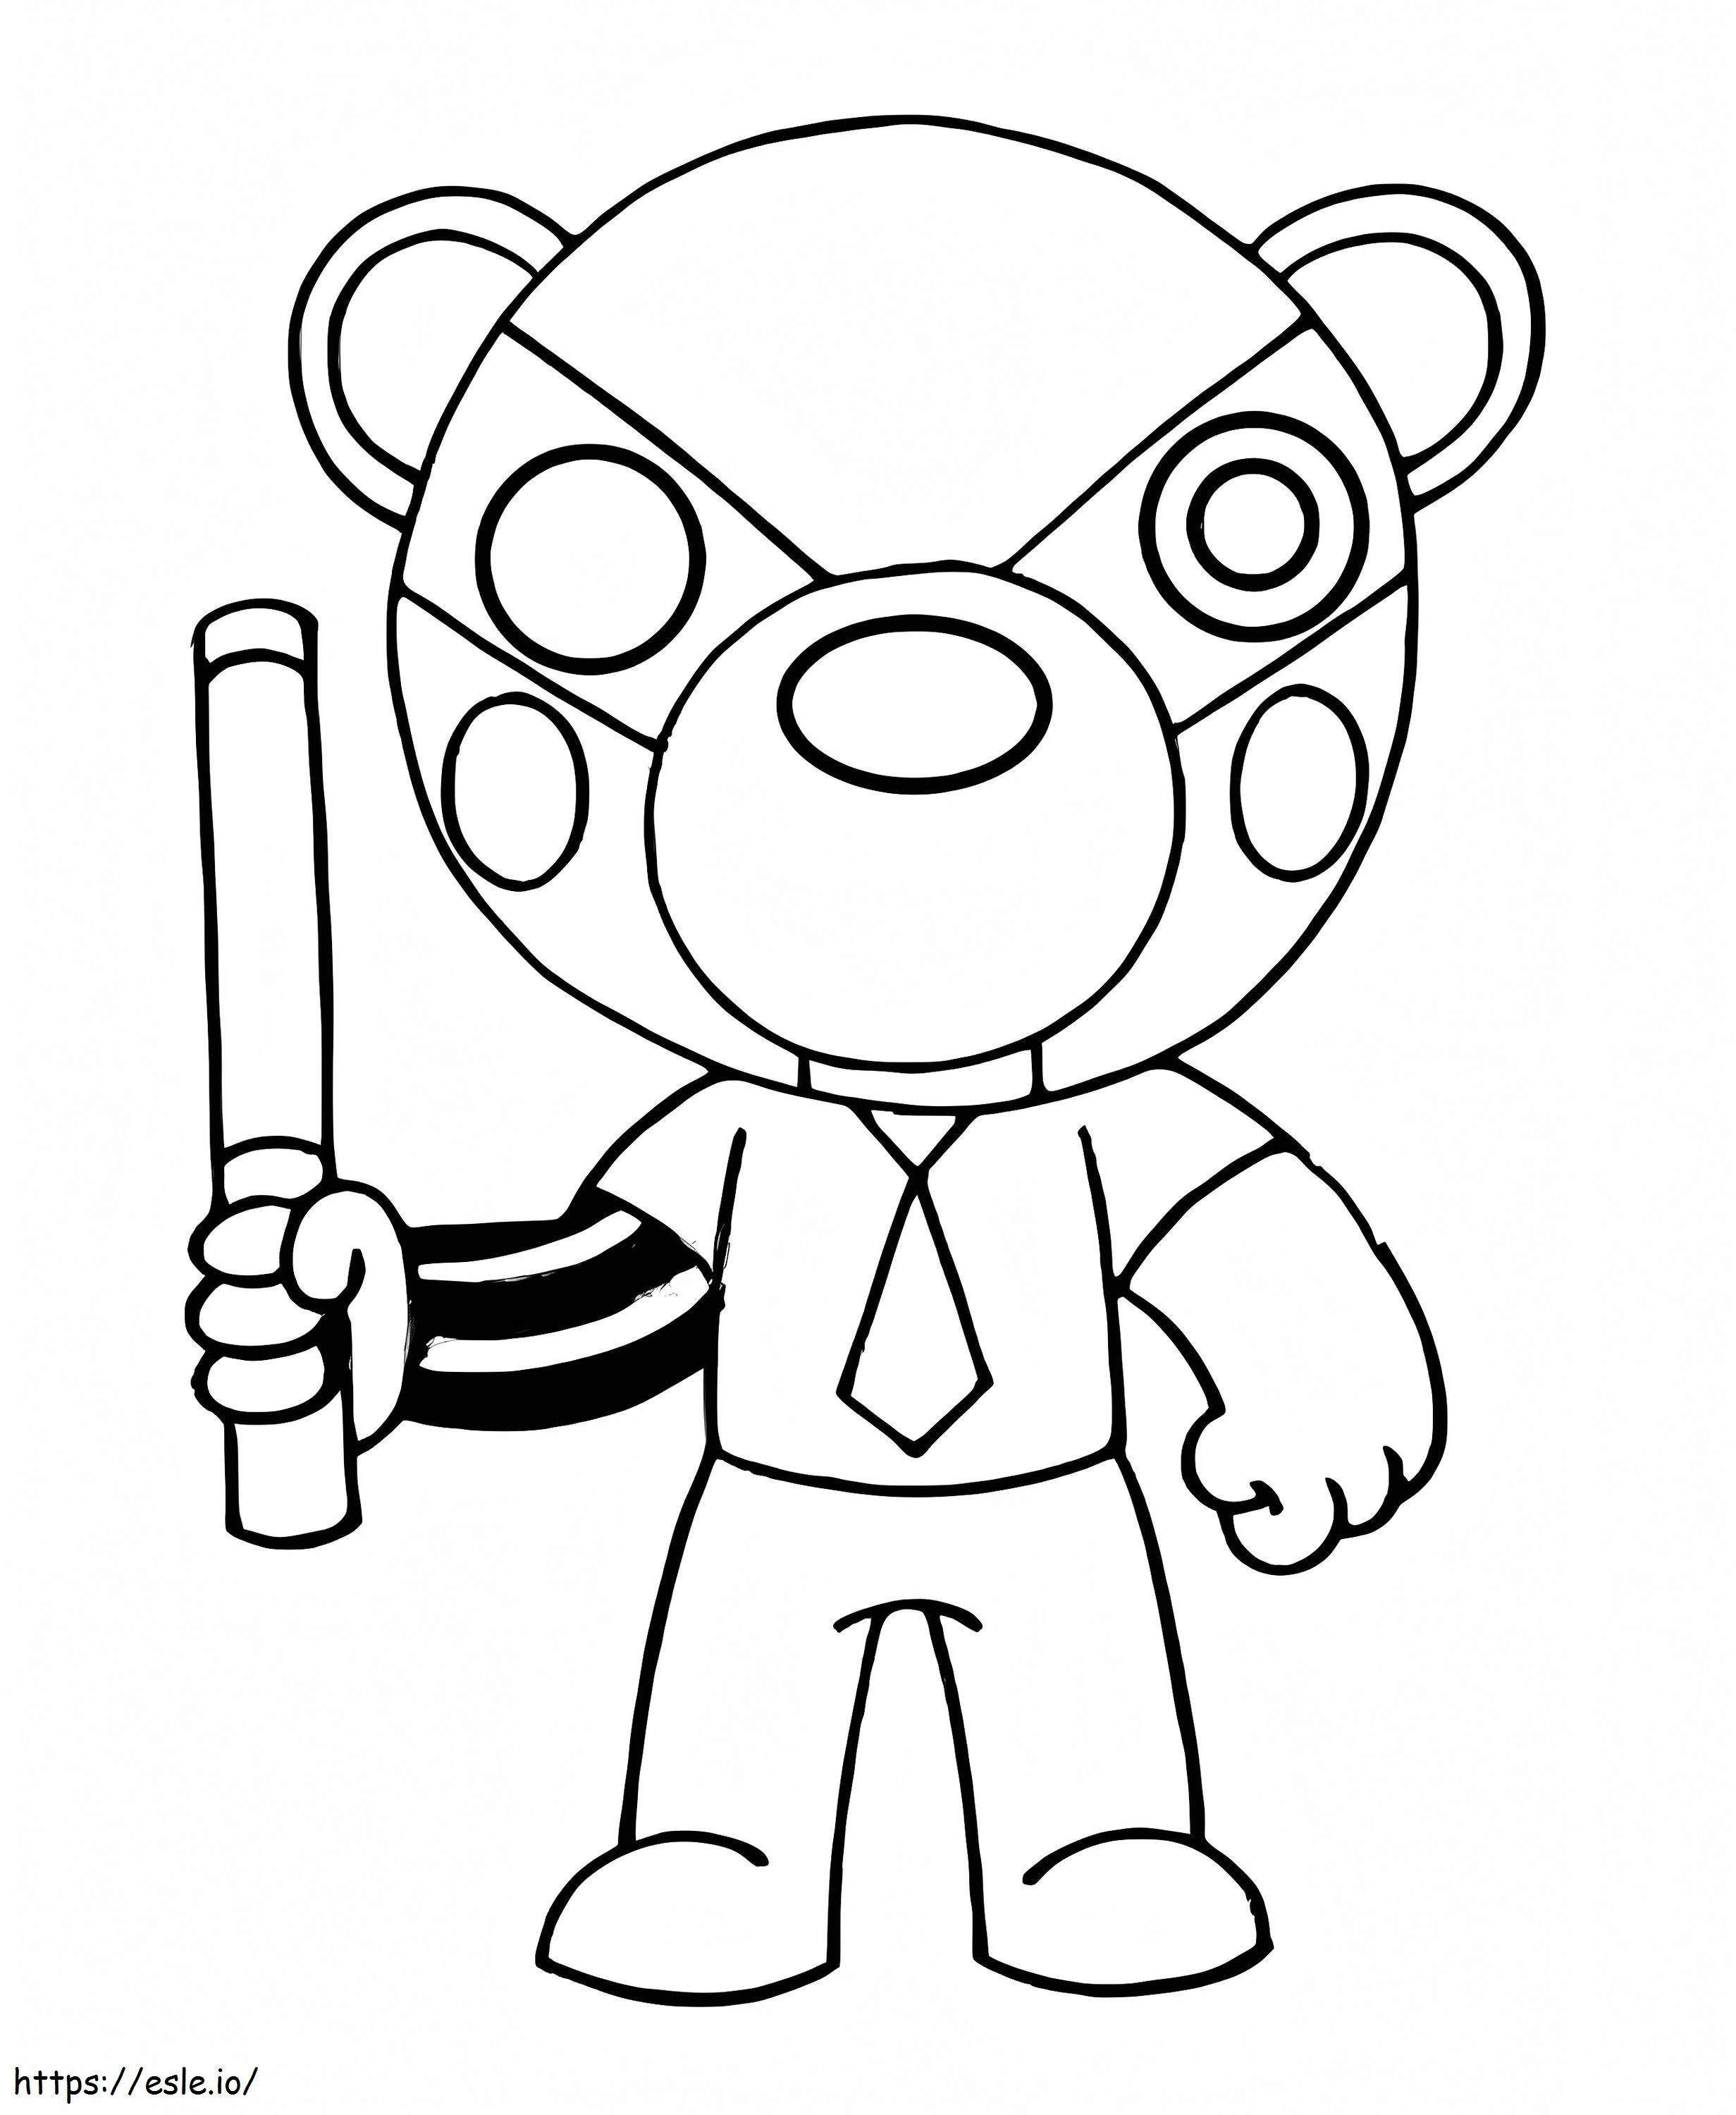 Badgy Piggy Roblox coloring page